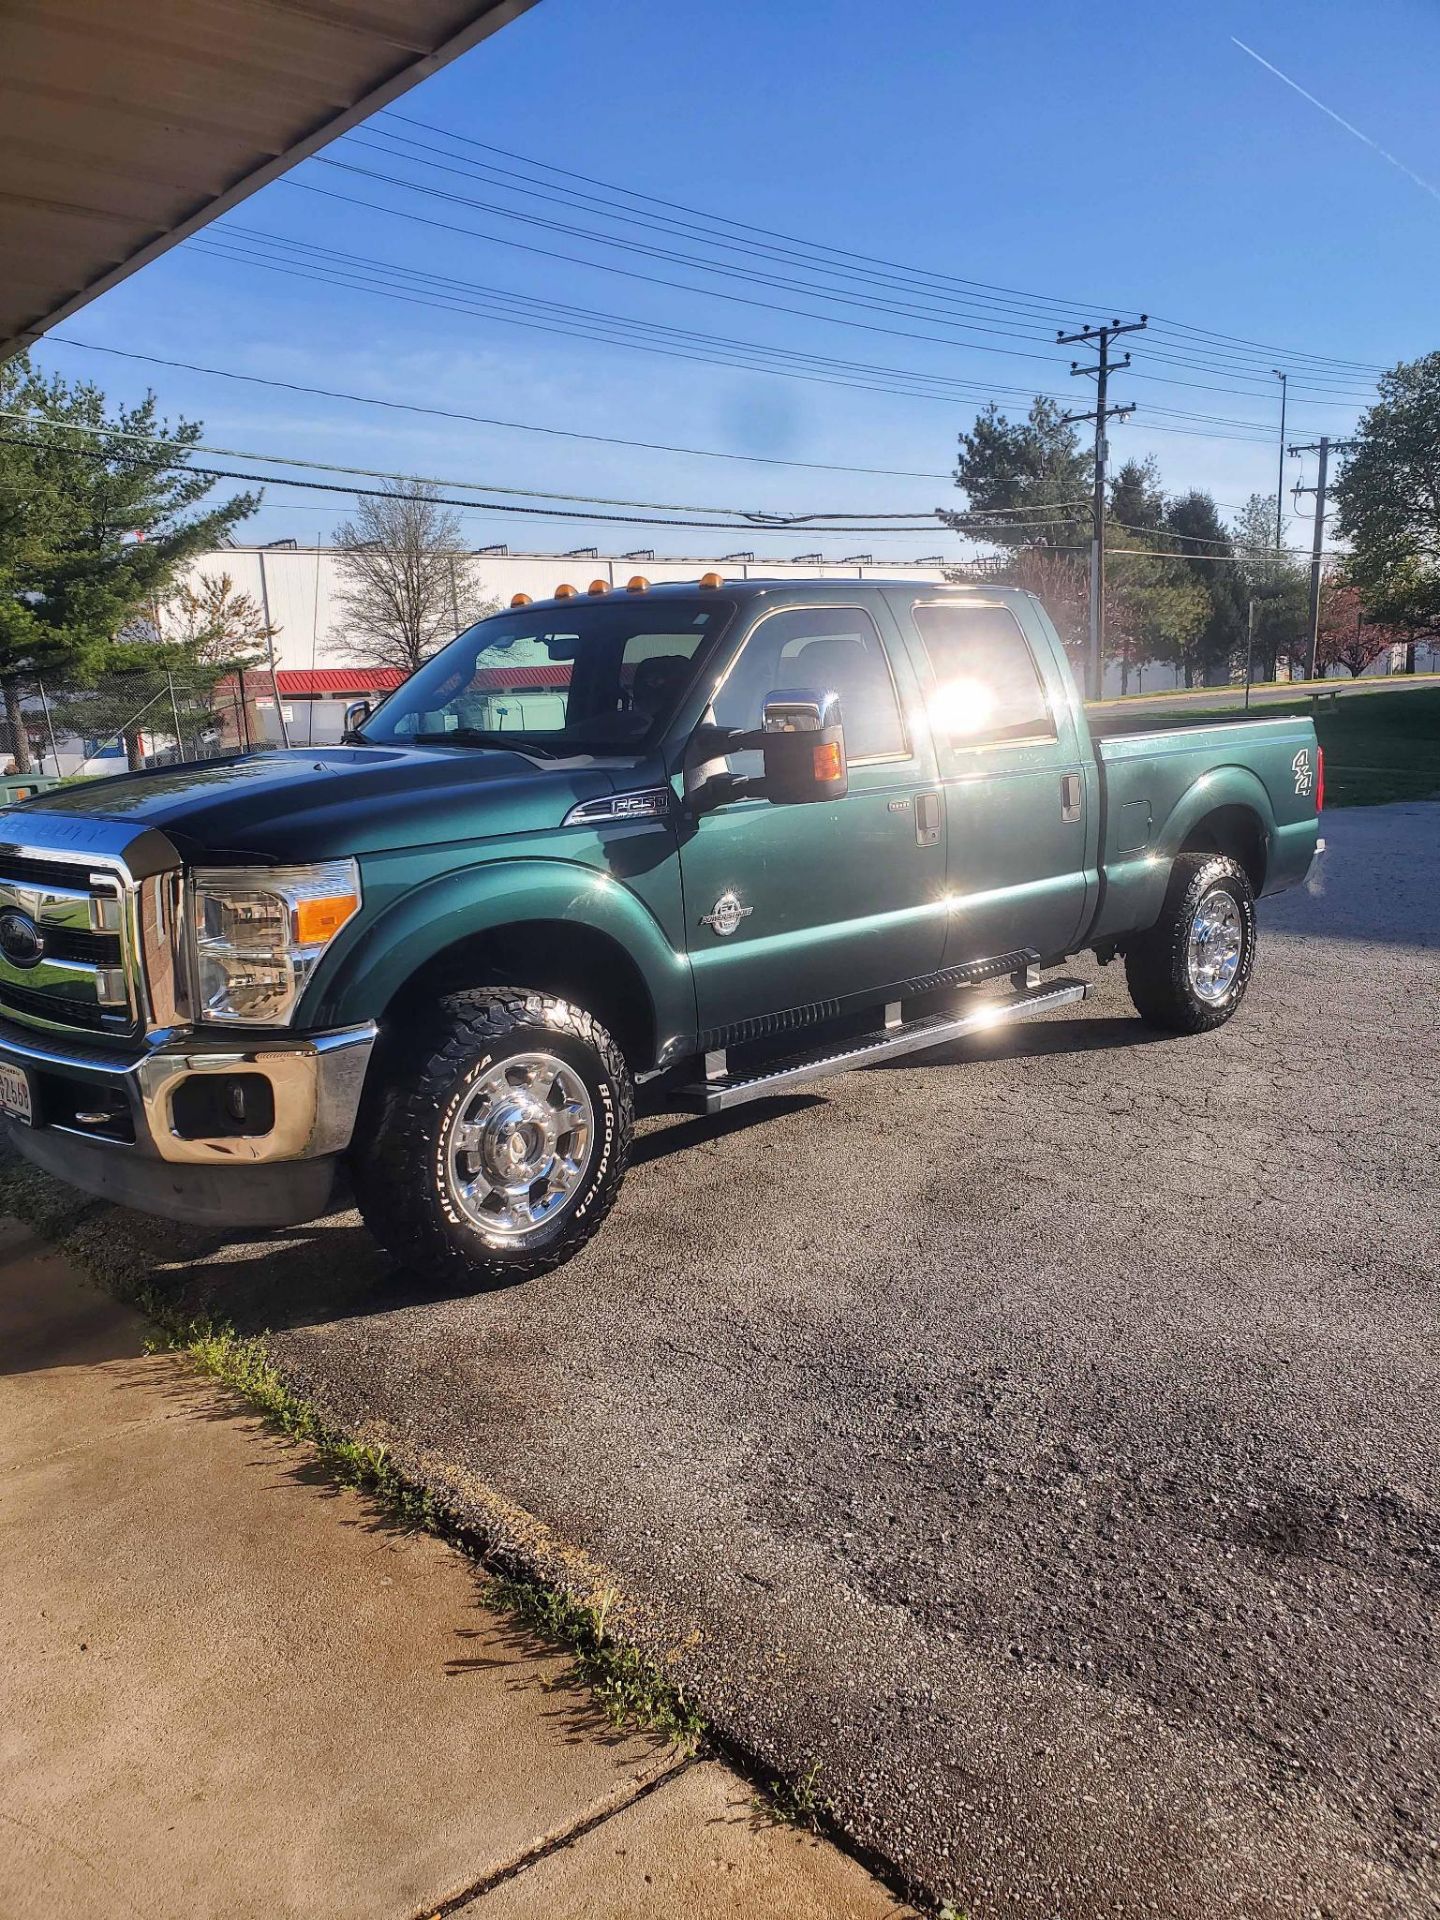 PICK-UP TRUCK, 2012 FORD F-250 SUPER DUTY XLT 4X4 CREW CAB, B20 diesel, running boards, 175,000 mile - Image 2 of 13